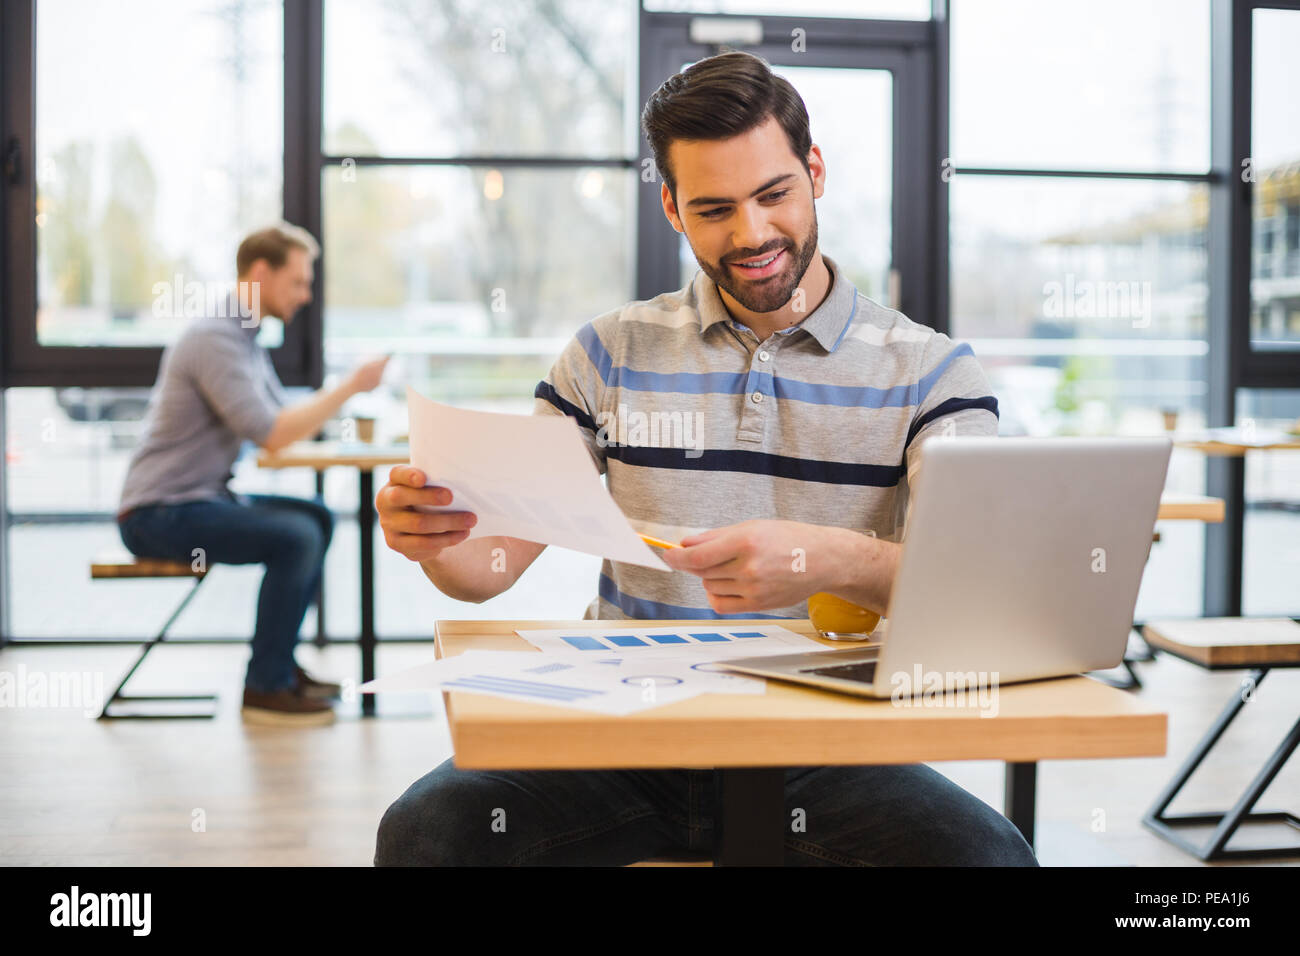 My work. Pleasant delighted nice man sitting at the table and holding a  drawing while looking at the tablet screen Stock Photo - Alamy